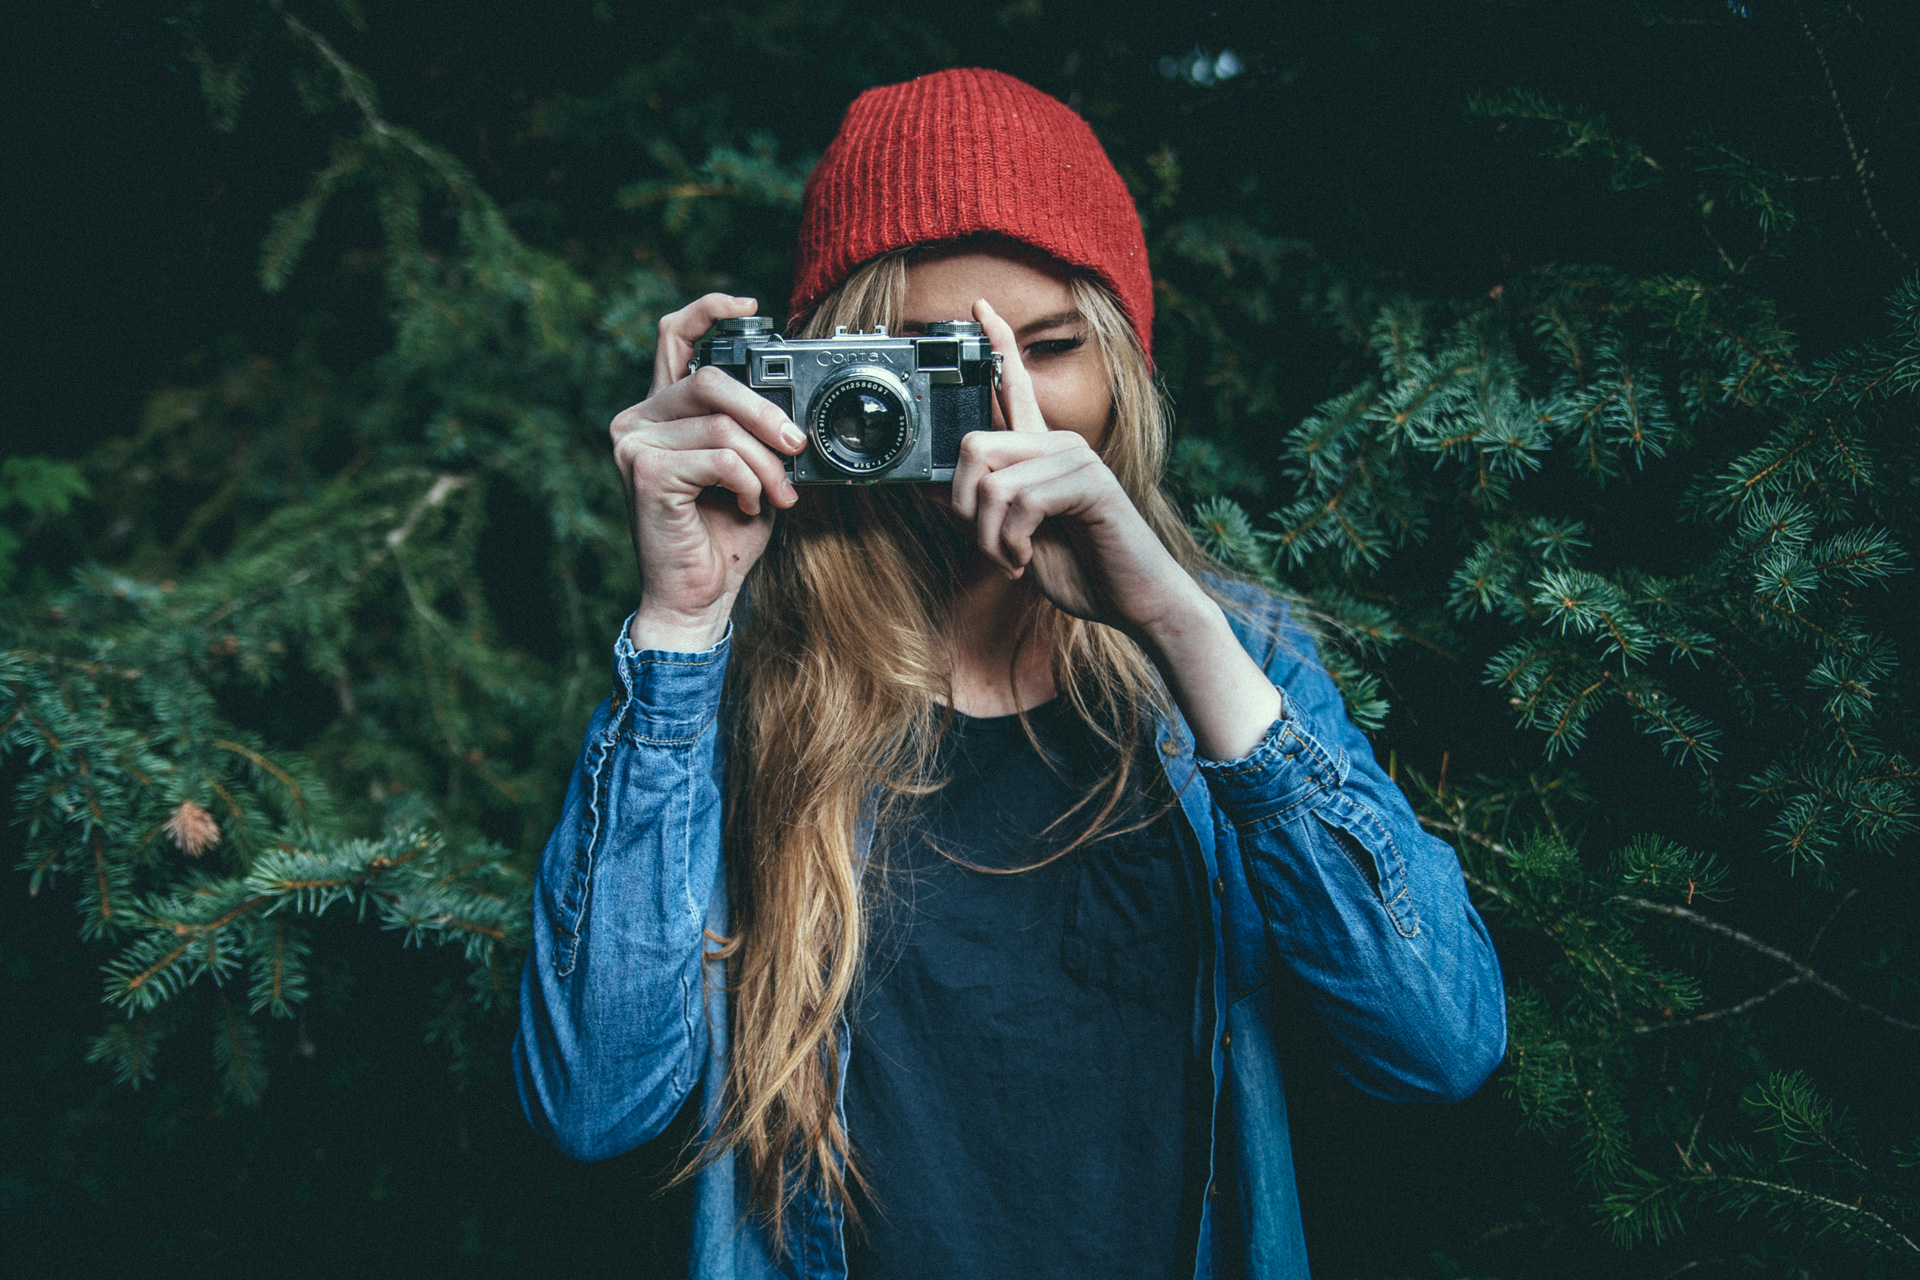 Woman taking picture with camera